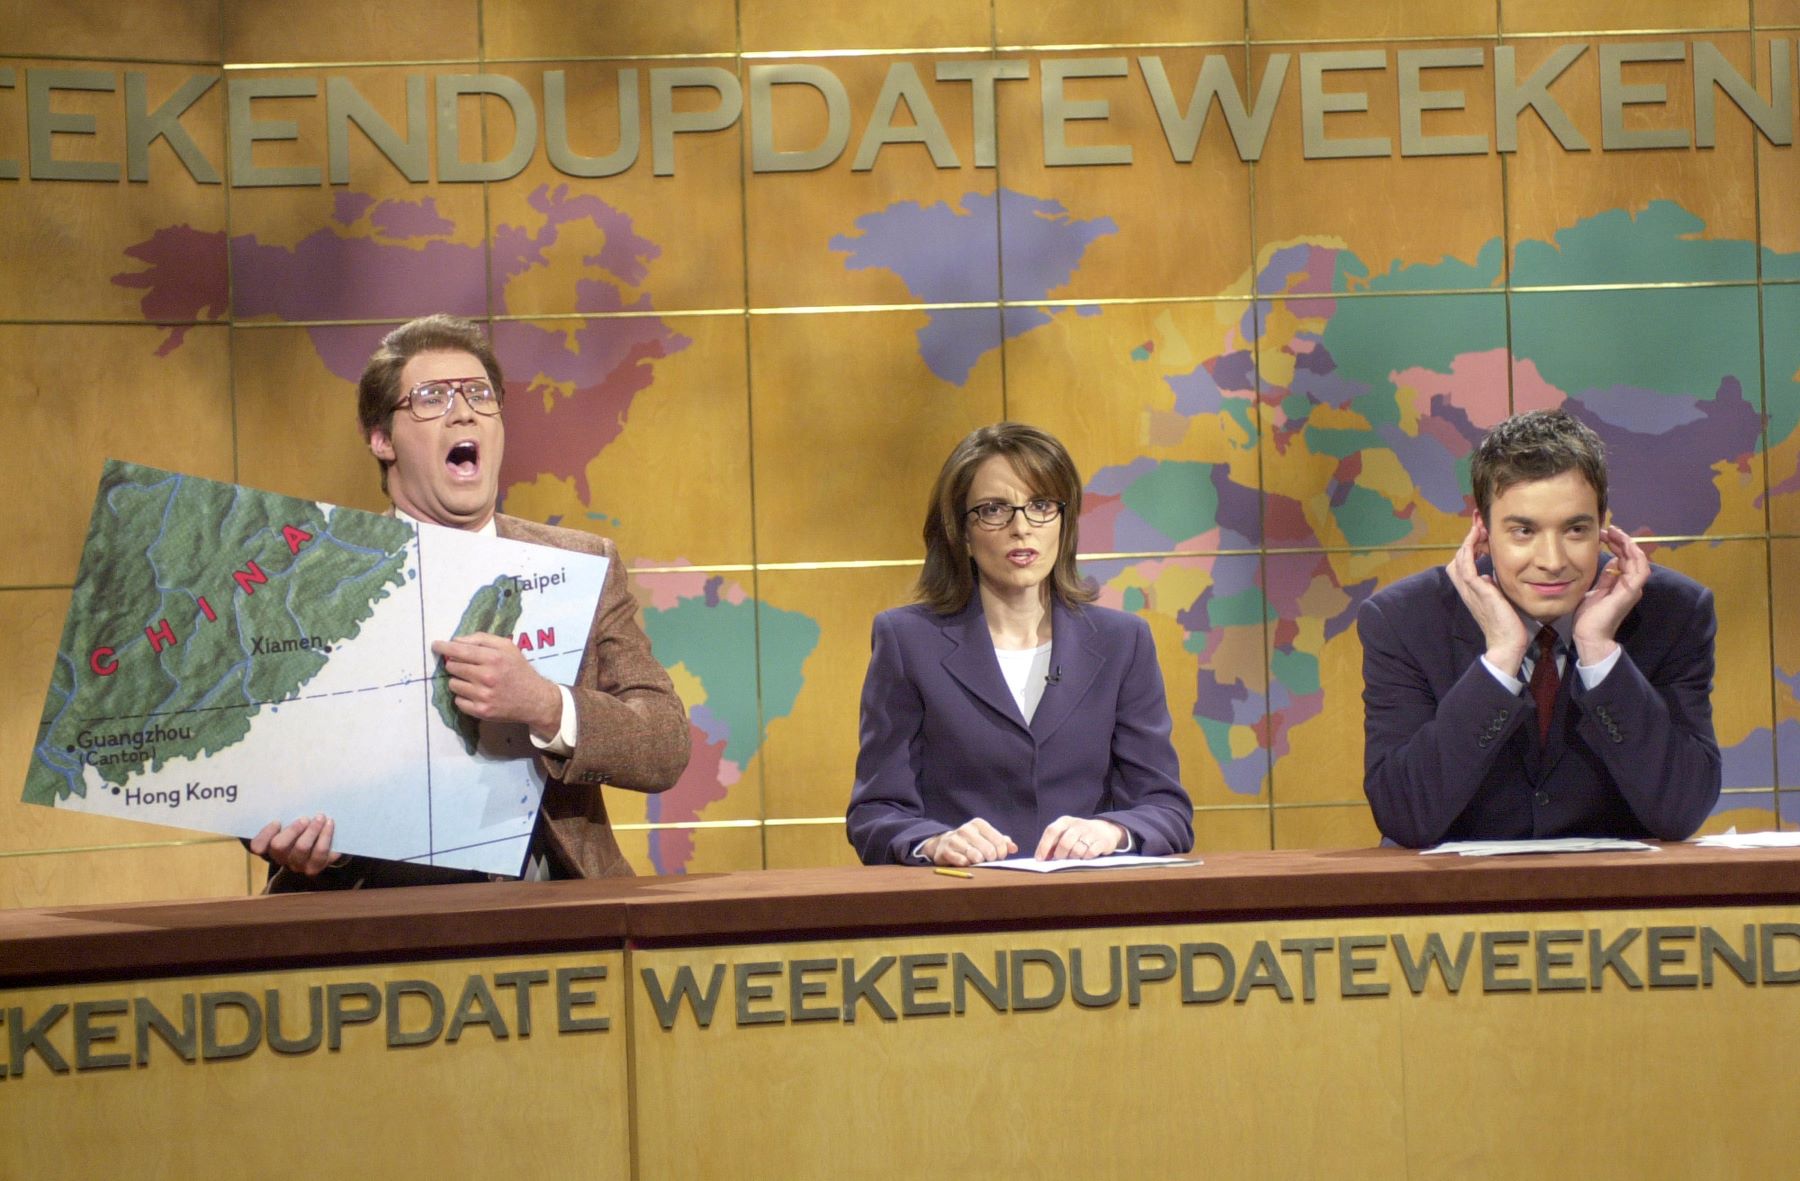 Will Ferrell as Jacob Silj on Weekend Update of 'Saturday Night Live' with Tina Fey and Jimmy Fallon